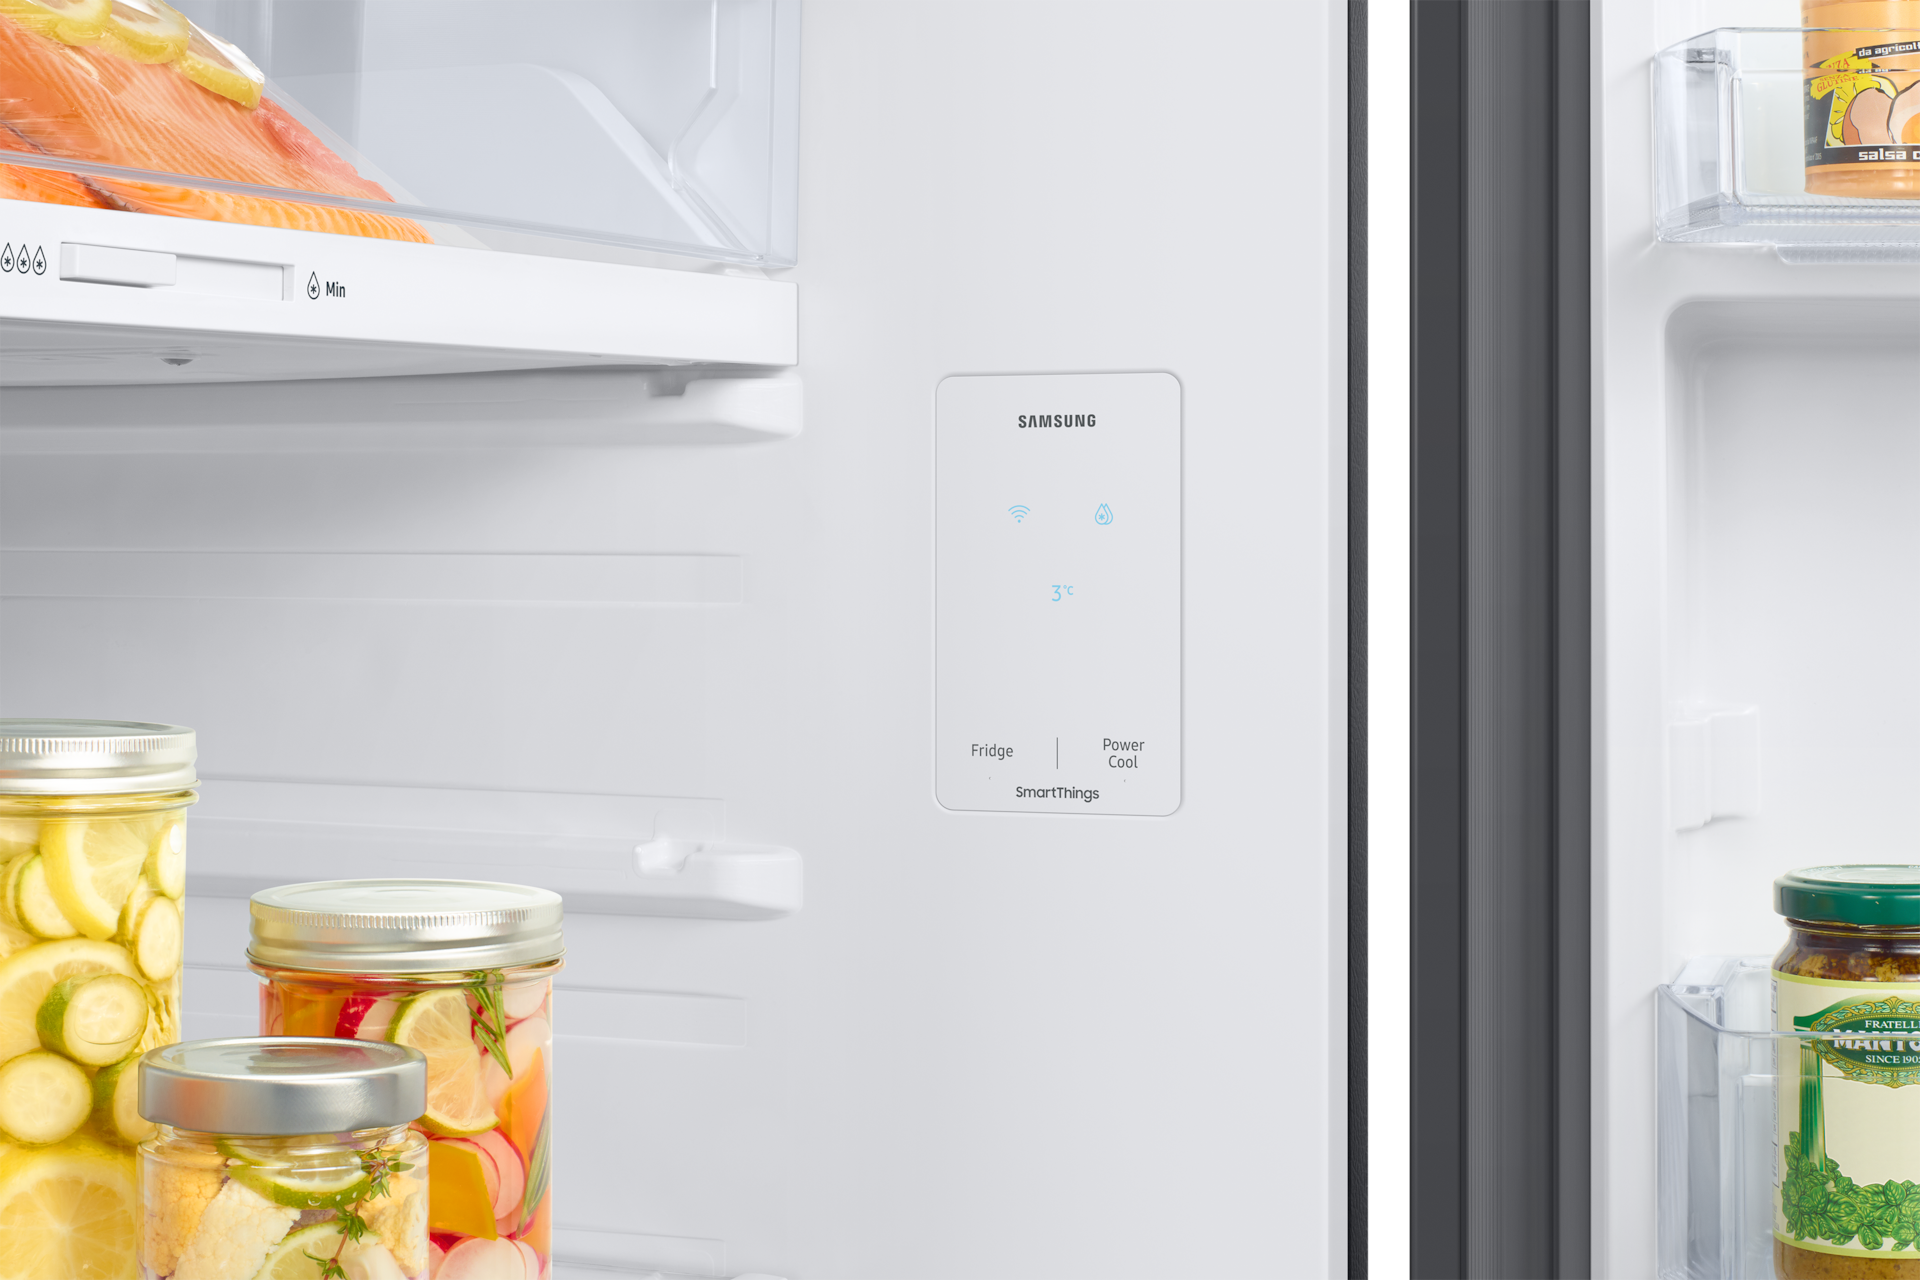 Samsung Refrigerator 460 Liters A+++ Smart with Freezer on Top - Black